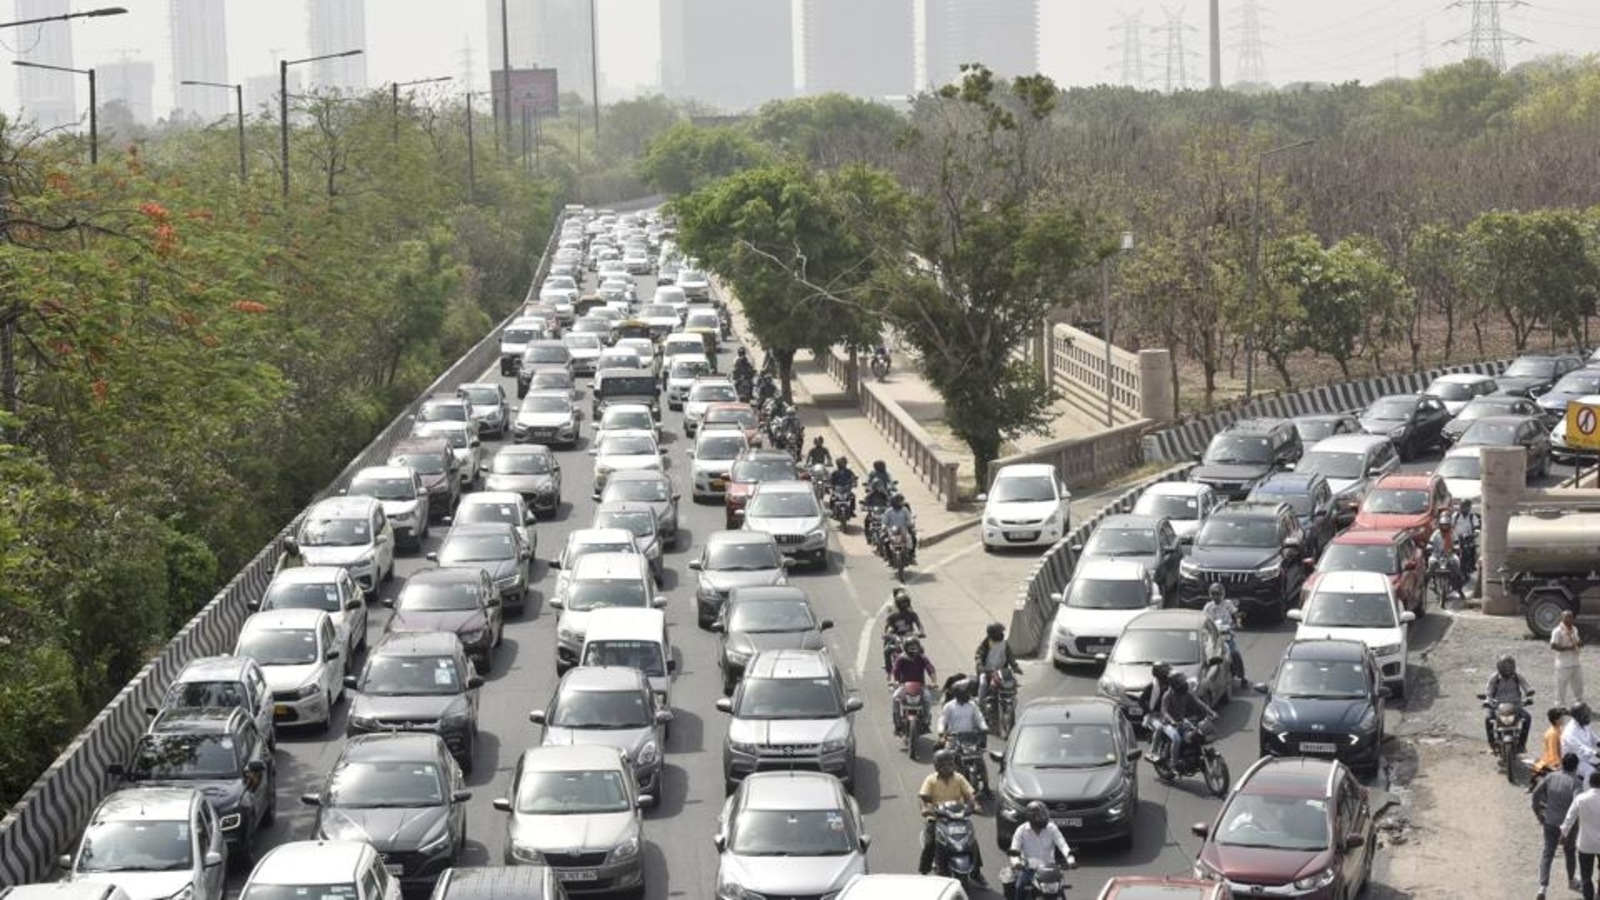 Hate traffic jams? Use mathematics to solve problem, says Israel firm